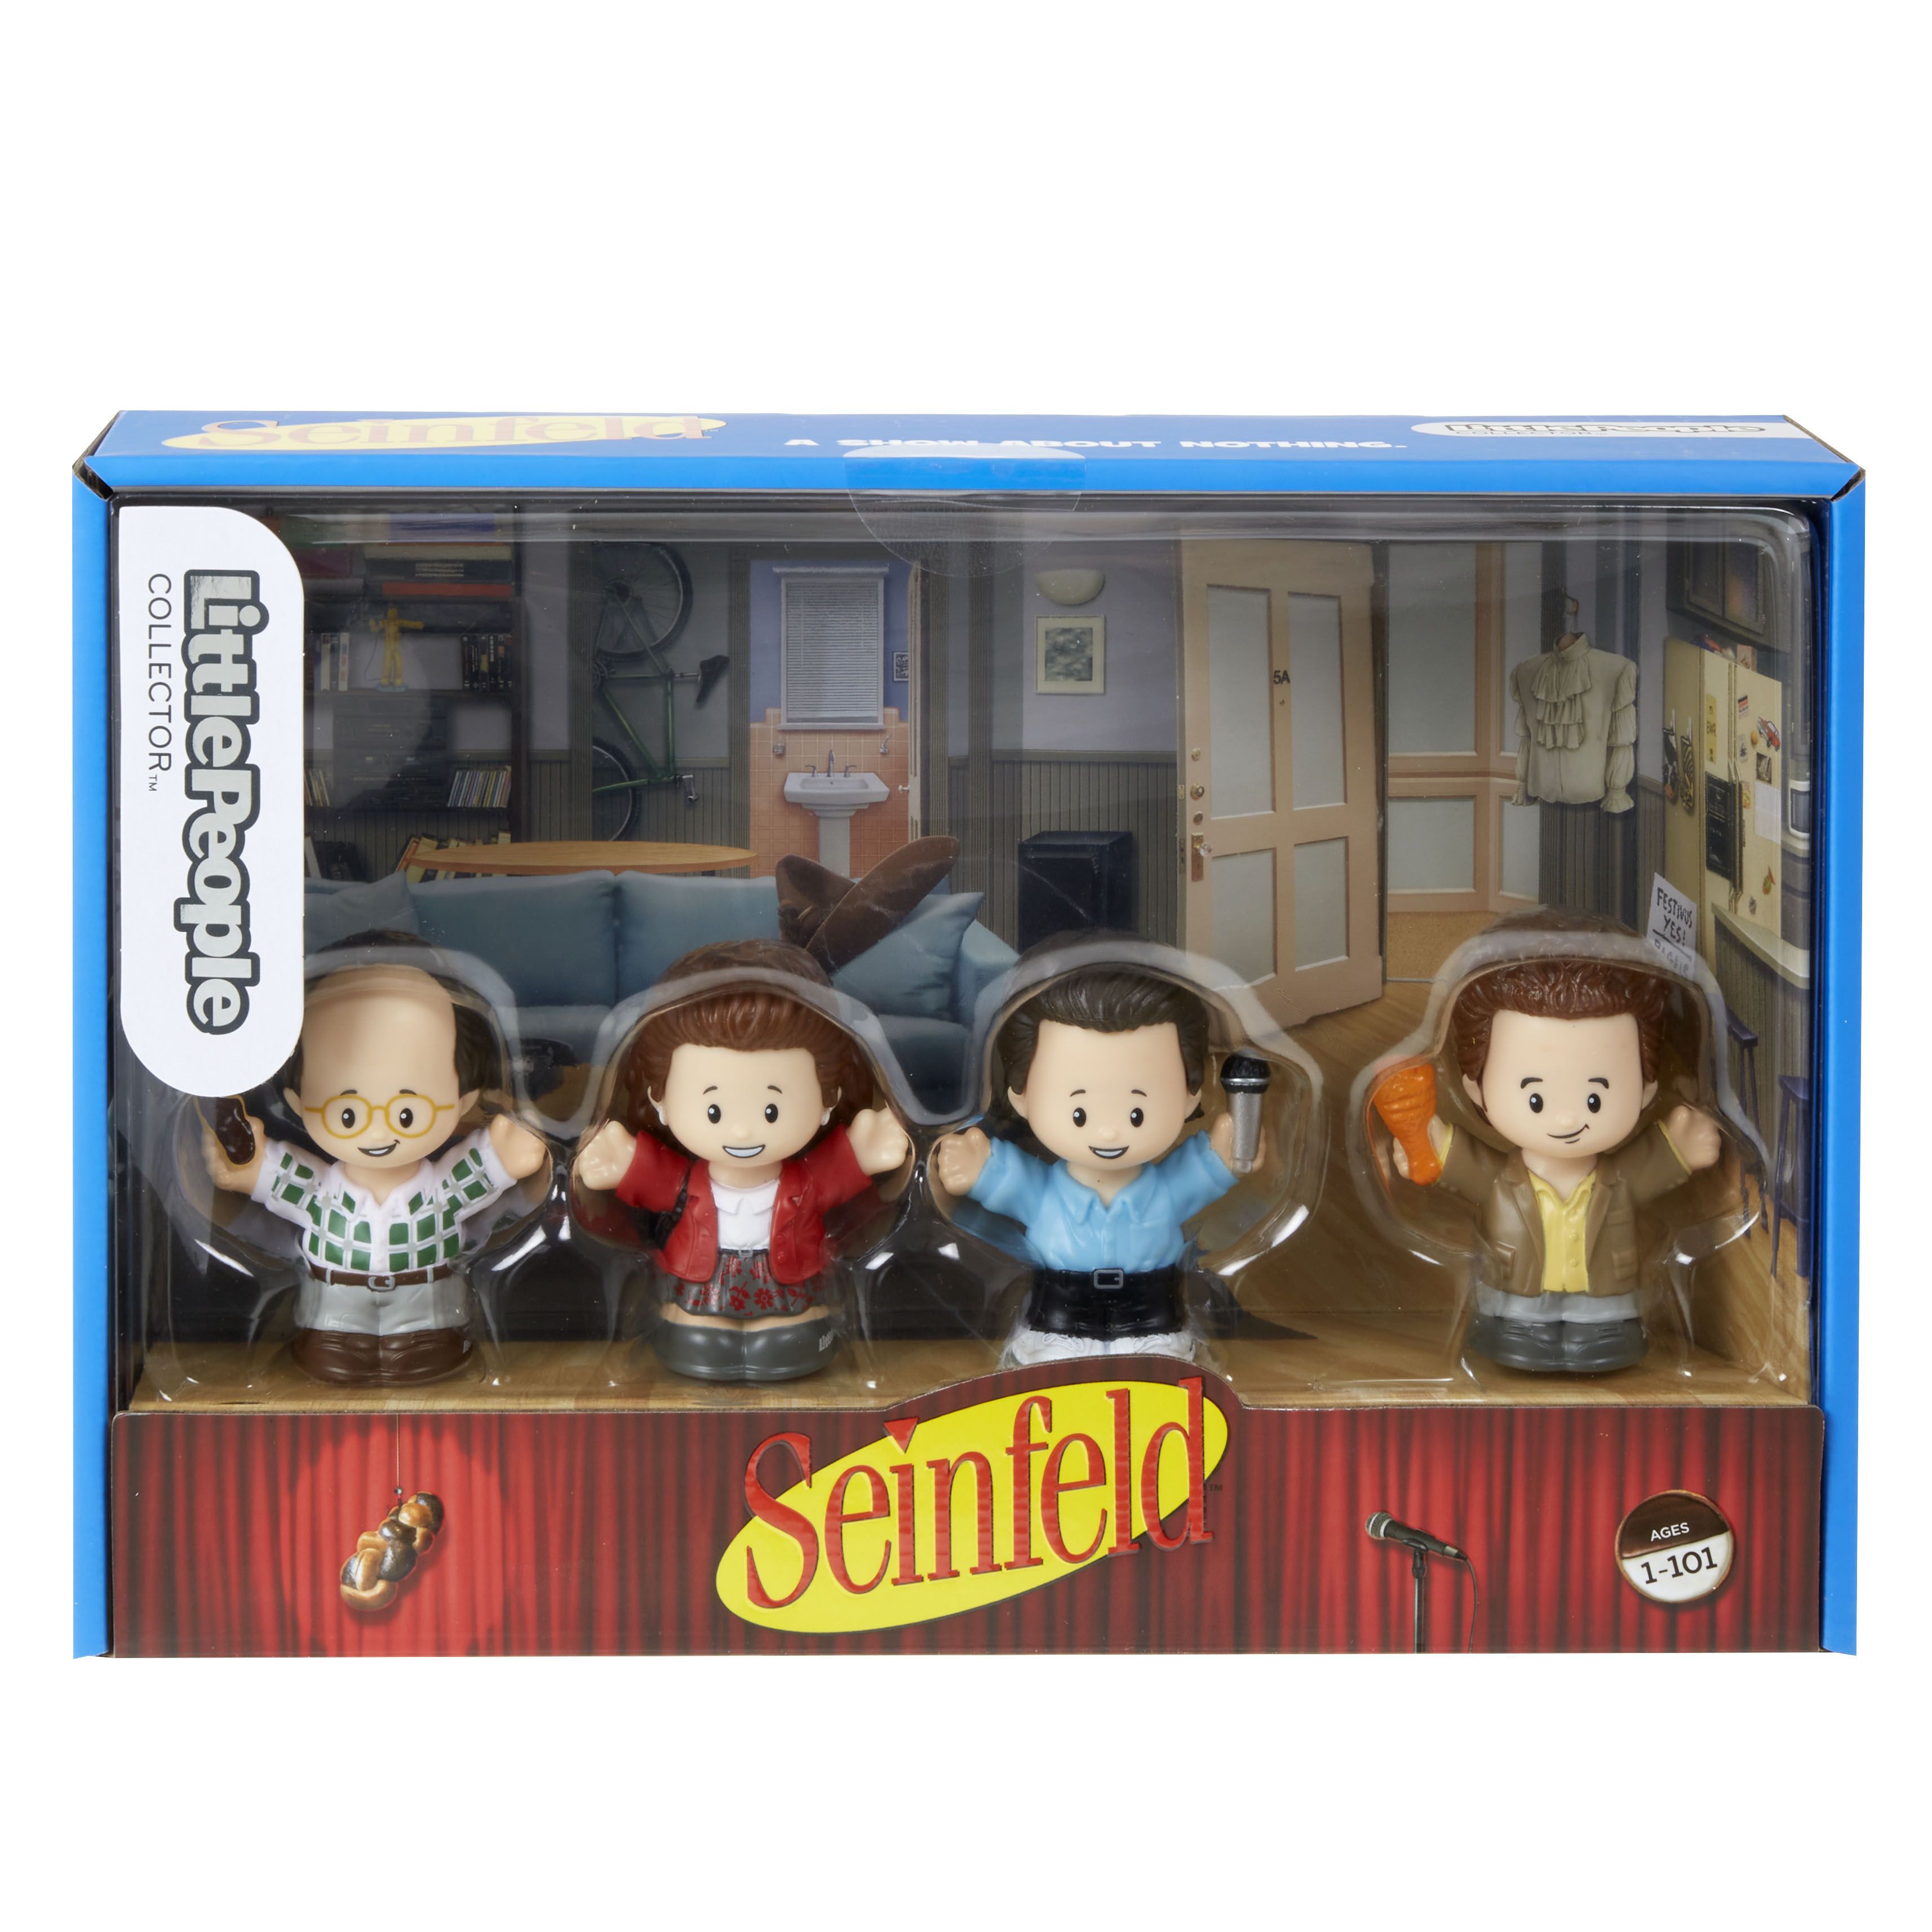 Little People Collector 'Seinfeld' Special Edition Figure Set